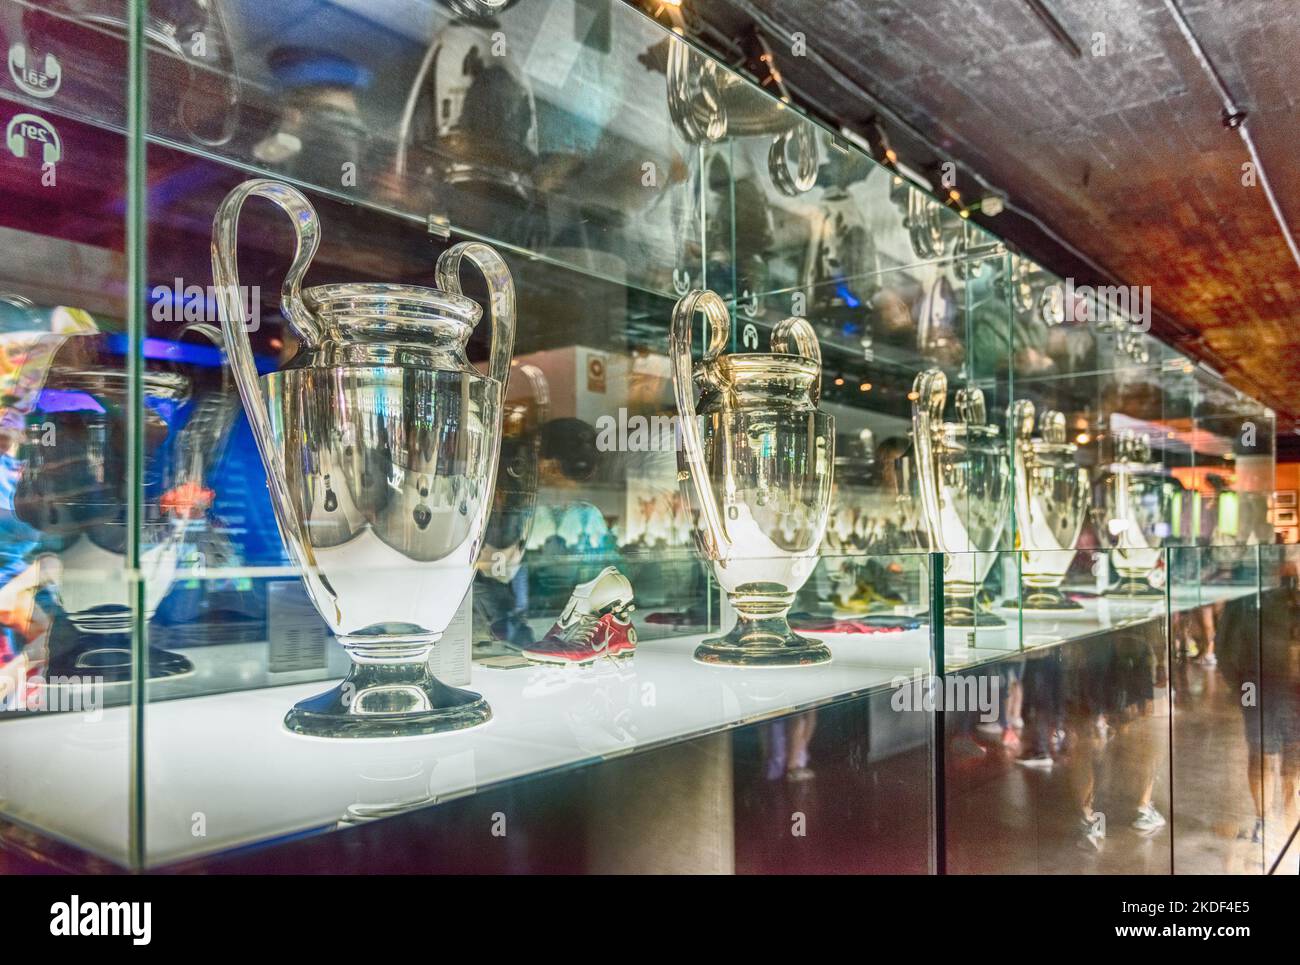 BARCELONA - AUGUST 11: Row of Champions League cups won by FC Barcelona, at the Camp Nou Experience Tour and Museum, Barcelona, Catalonia, Spain, on A Stock Photo